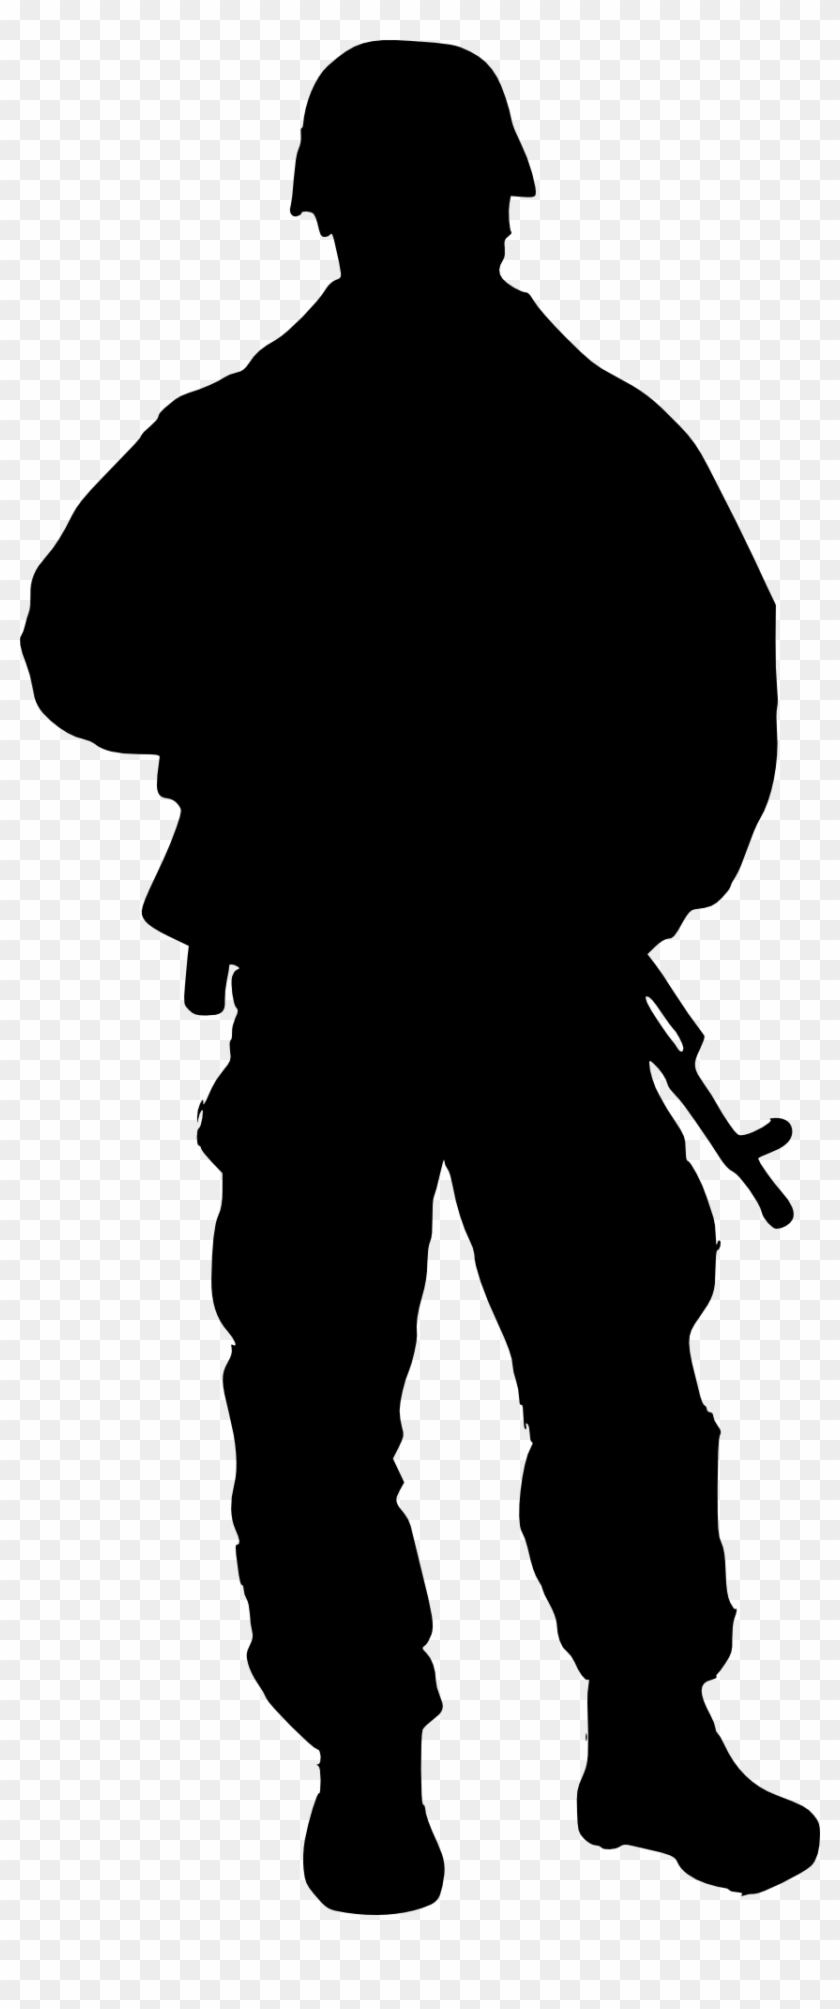 Free Png Soldier Silhouette Png - Soldier Silhouette Png Clipart #259253